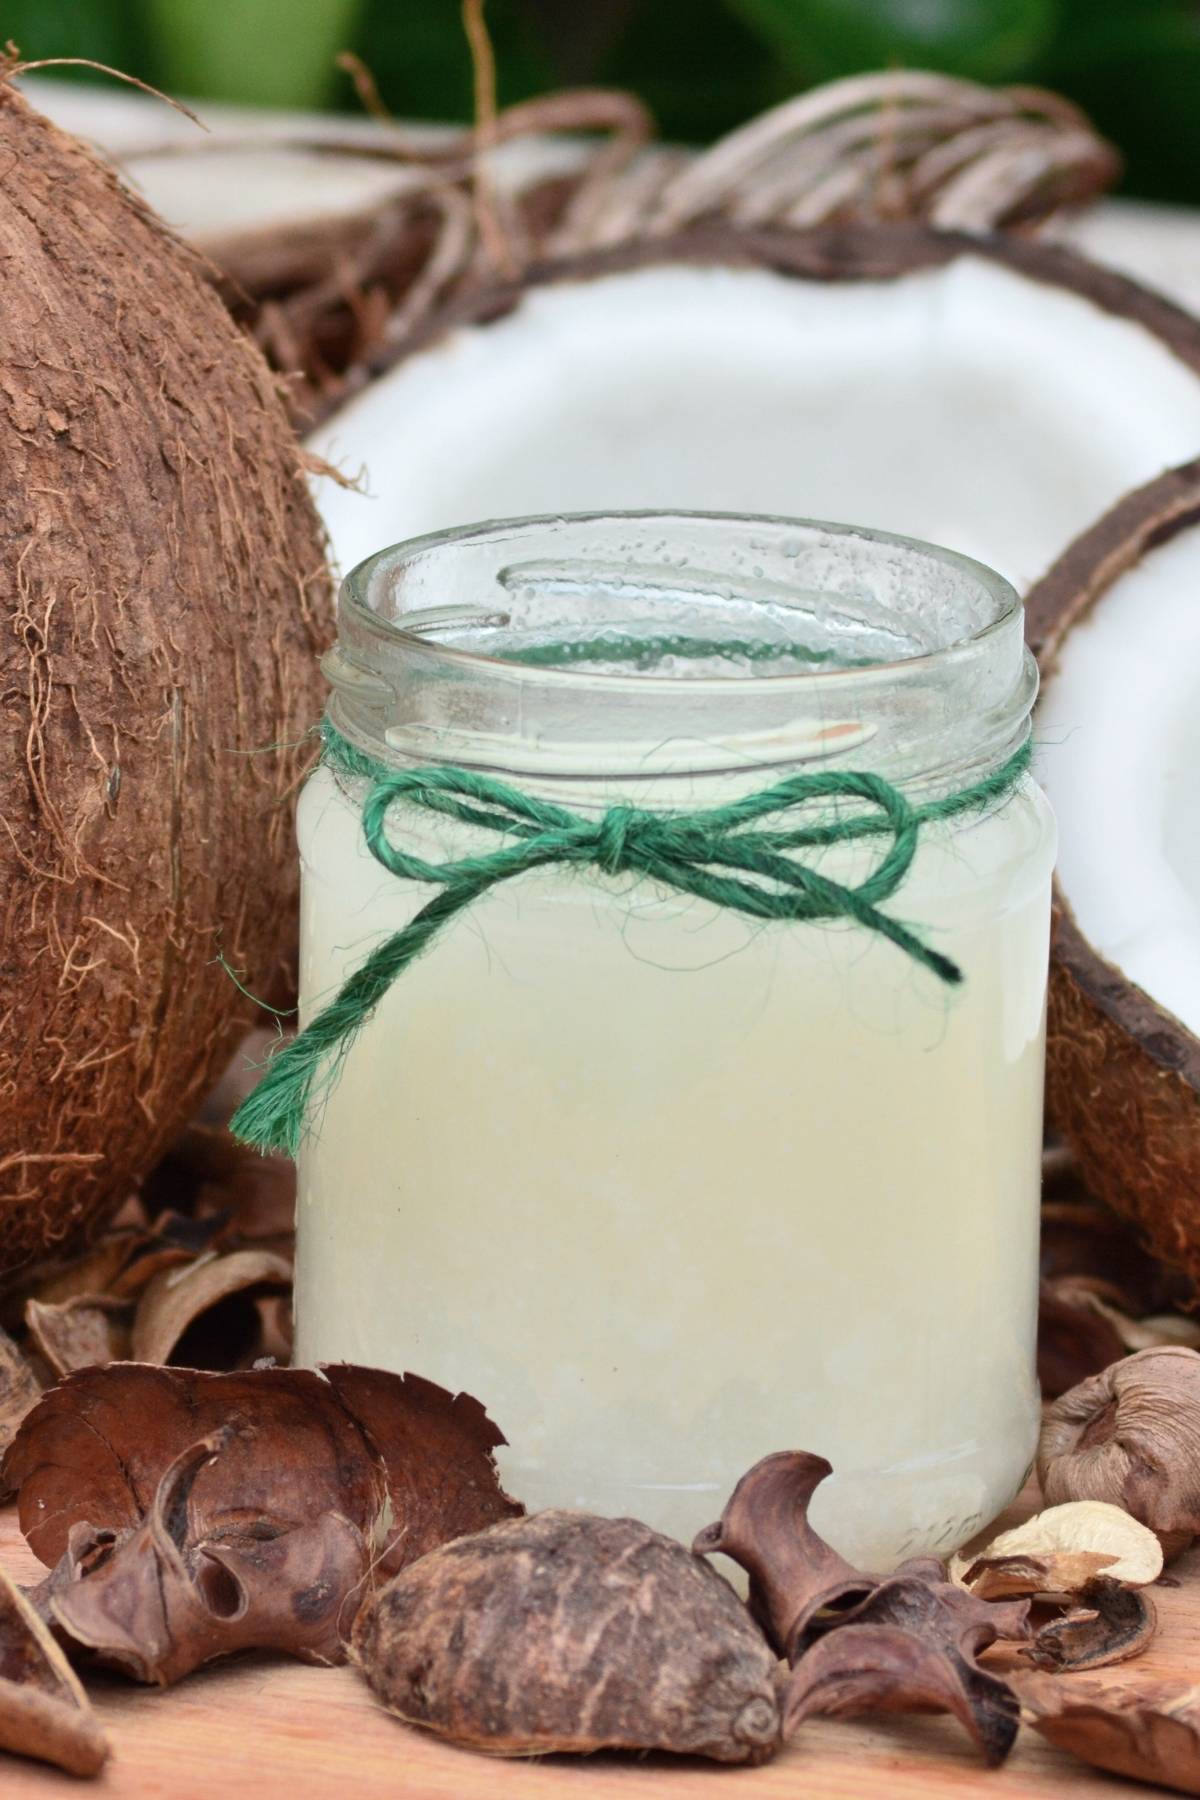 Does coconut oil ever go bad? What are the key signs of bad coconut oil? How to store it properly and how long does it last? Keep reading and you’ll find everything that you need to know.